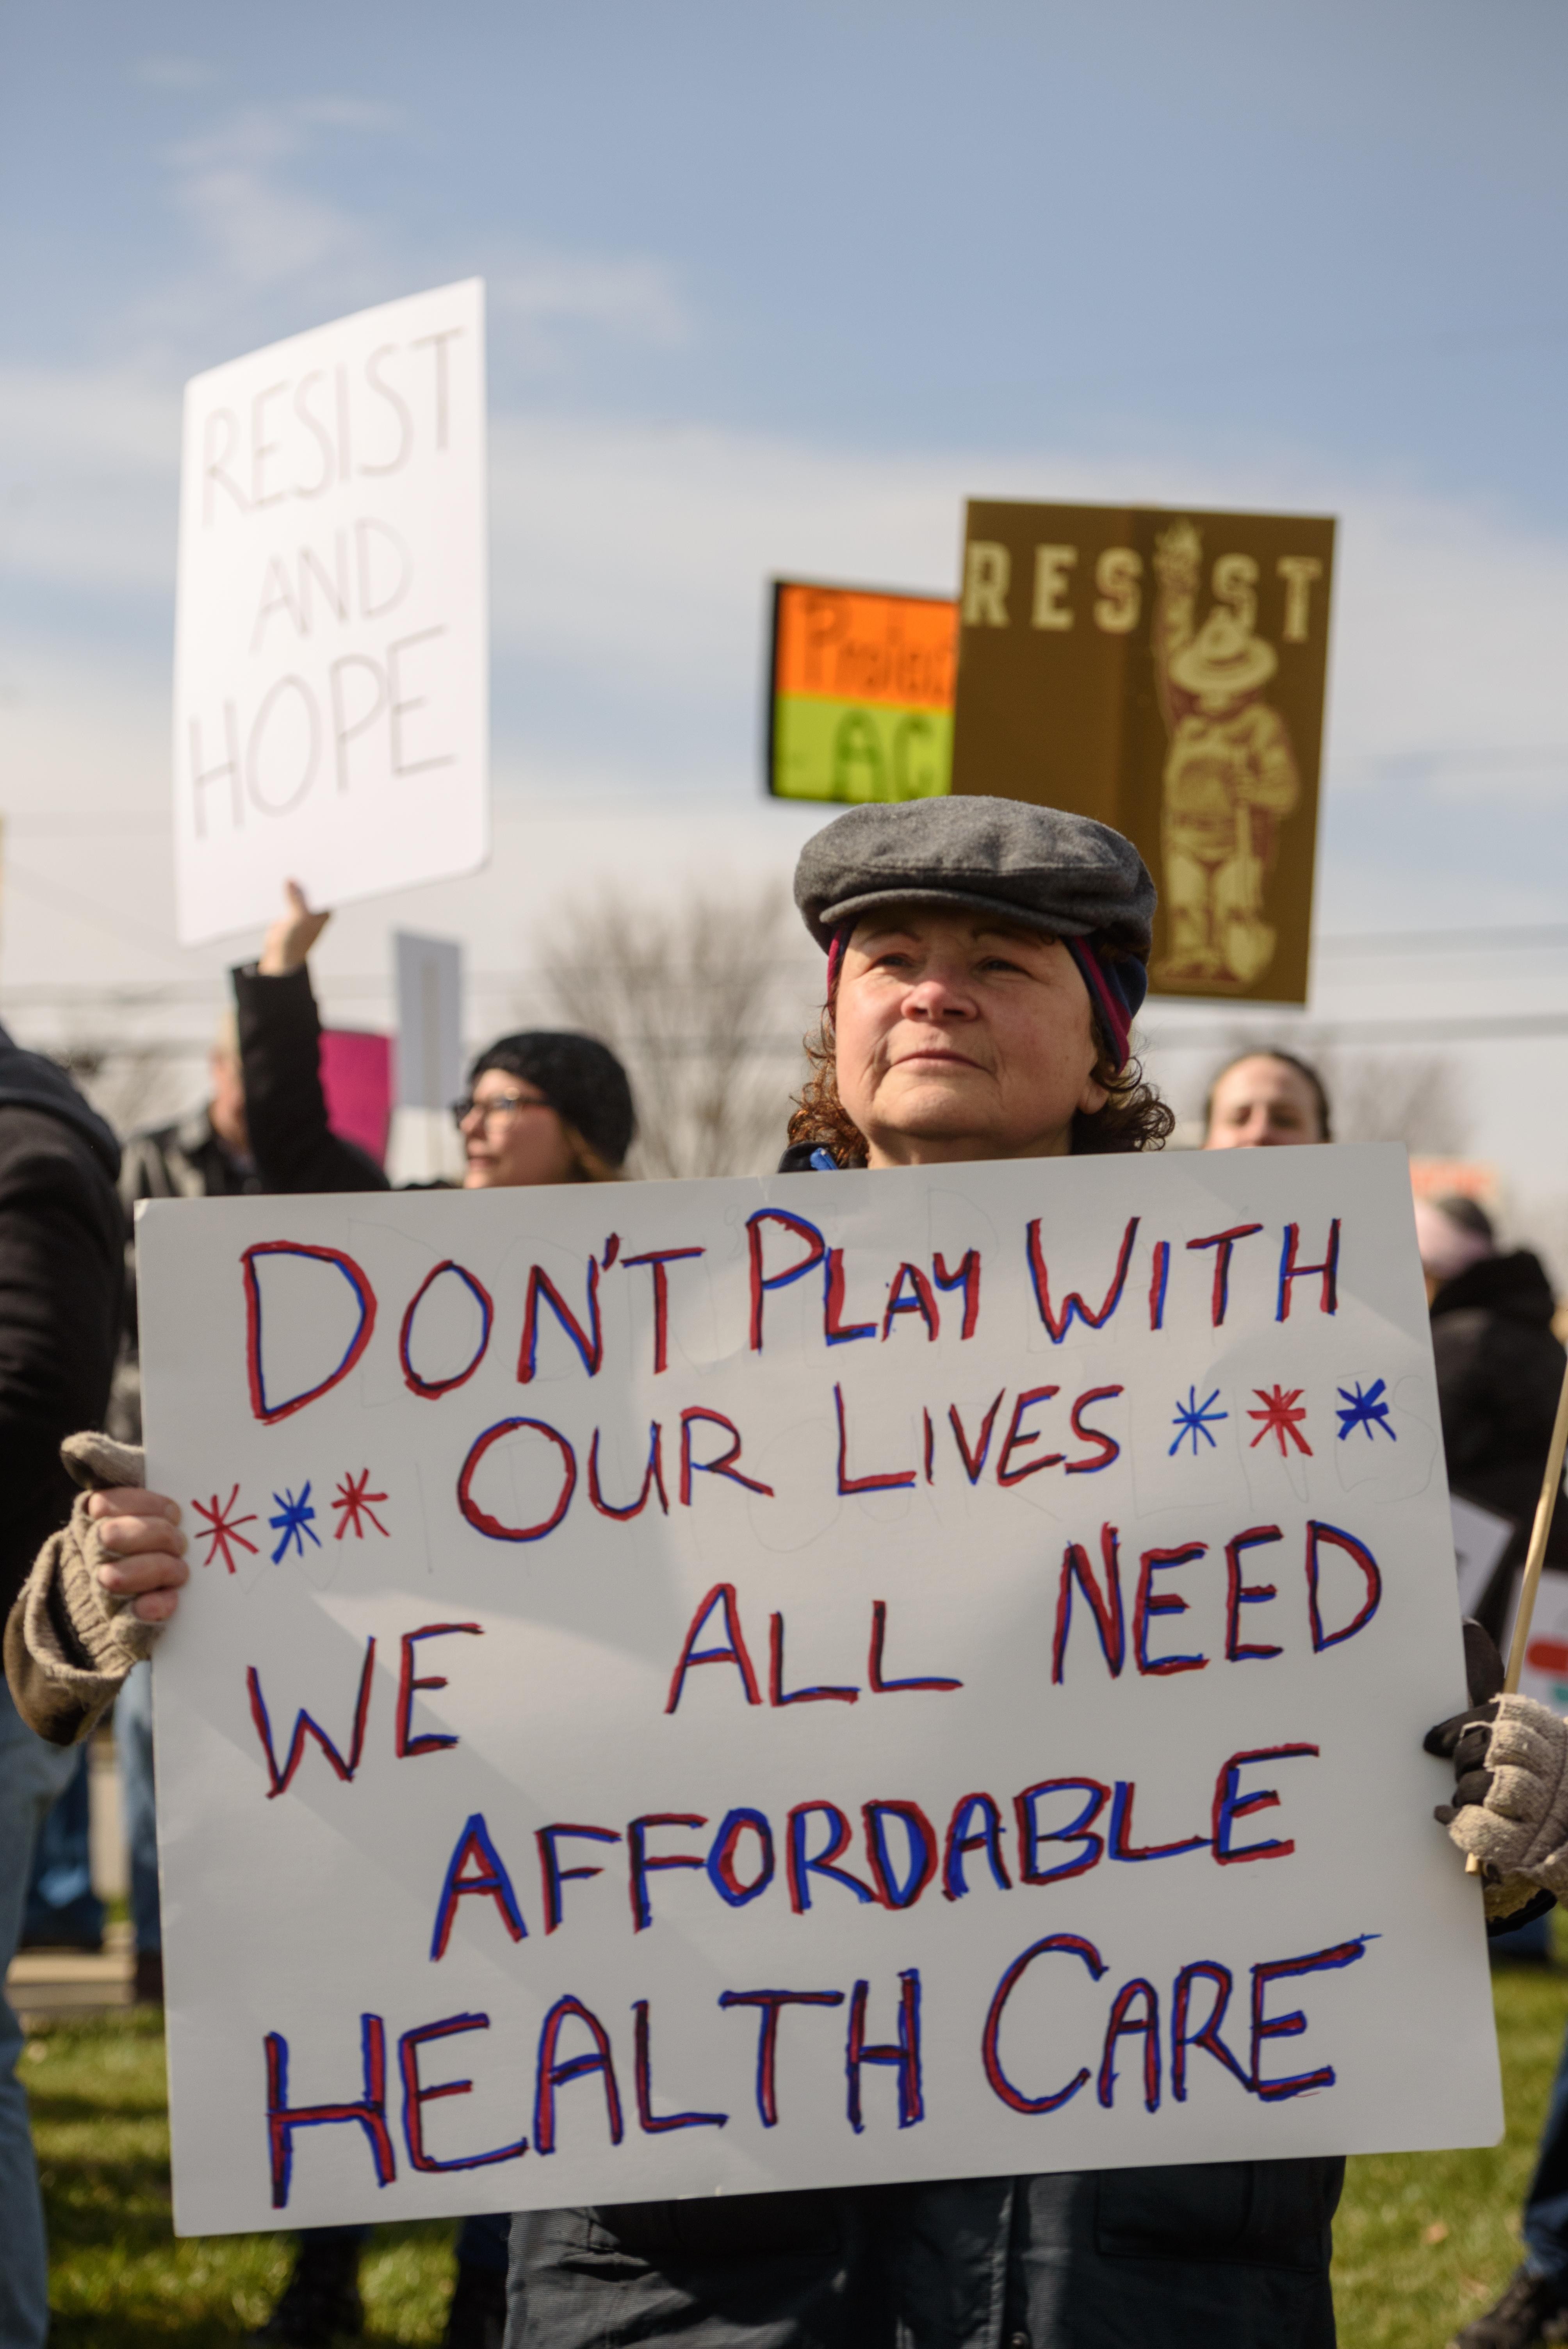 Holding a sign that read, "Don't play with our lives - We all need affordable healthcare," Melinda Feldman said, "I'm here because I'm an American and I care about healthcare, and not just for myself." - BRIAN BOHANNON